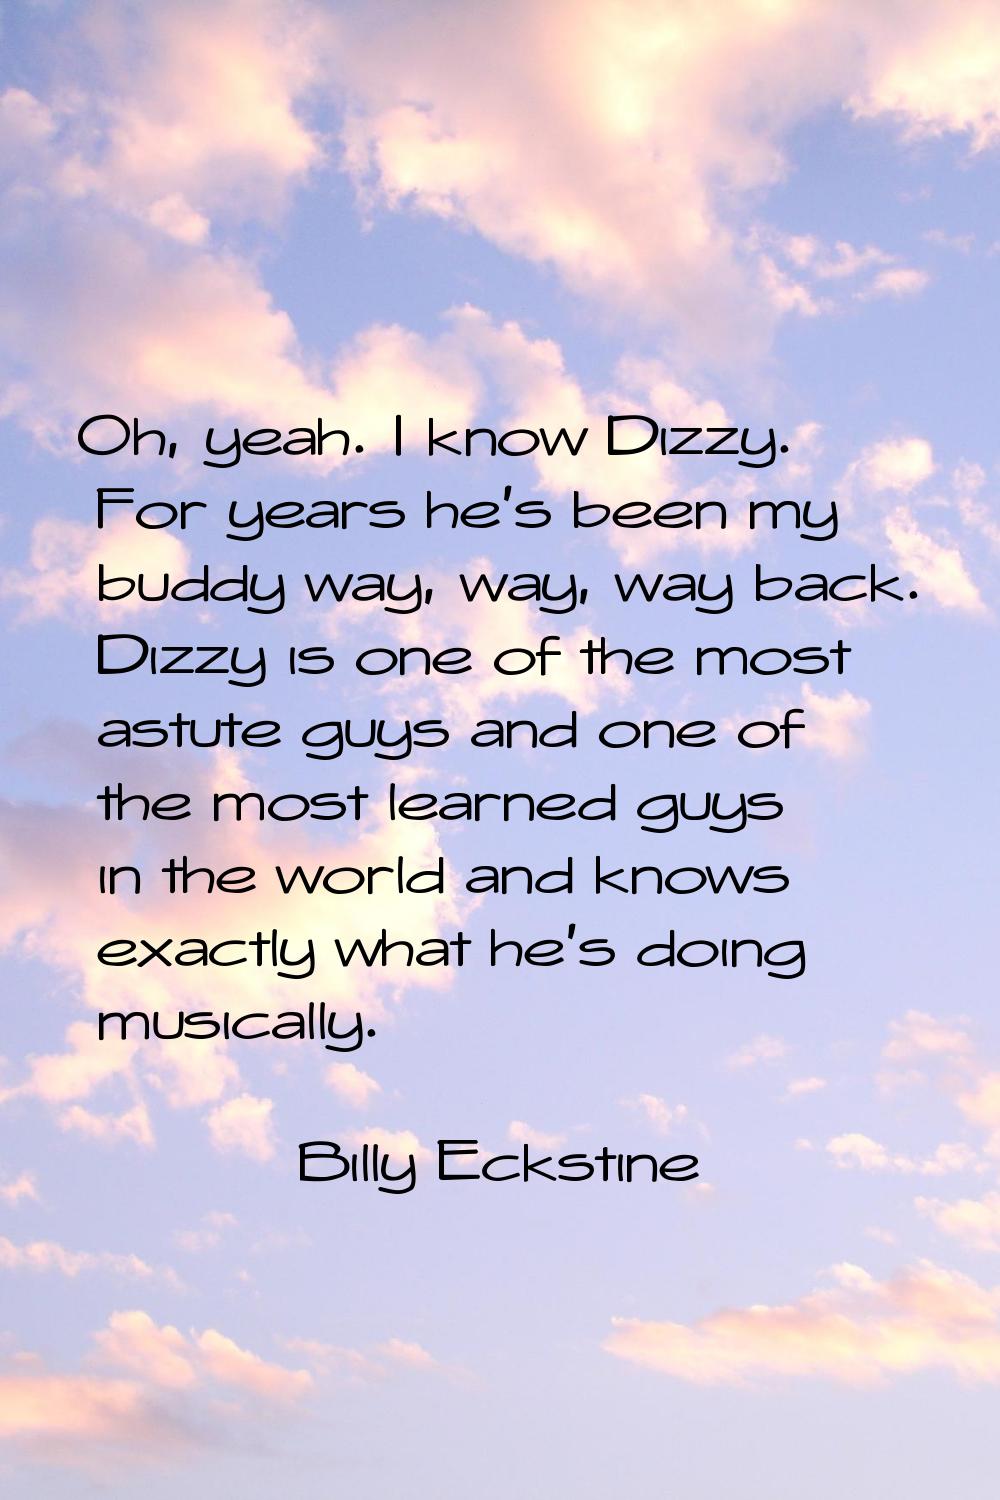 Oh, yeah. I know Dizzy. For years he's been my buddy way, way, way back. Dizzy is one of the most a